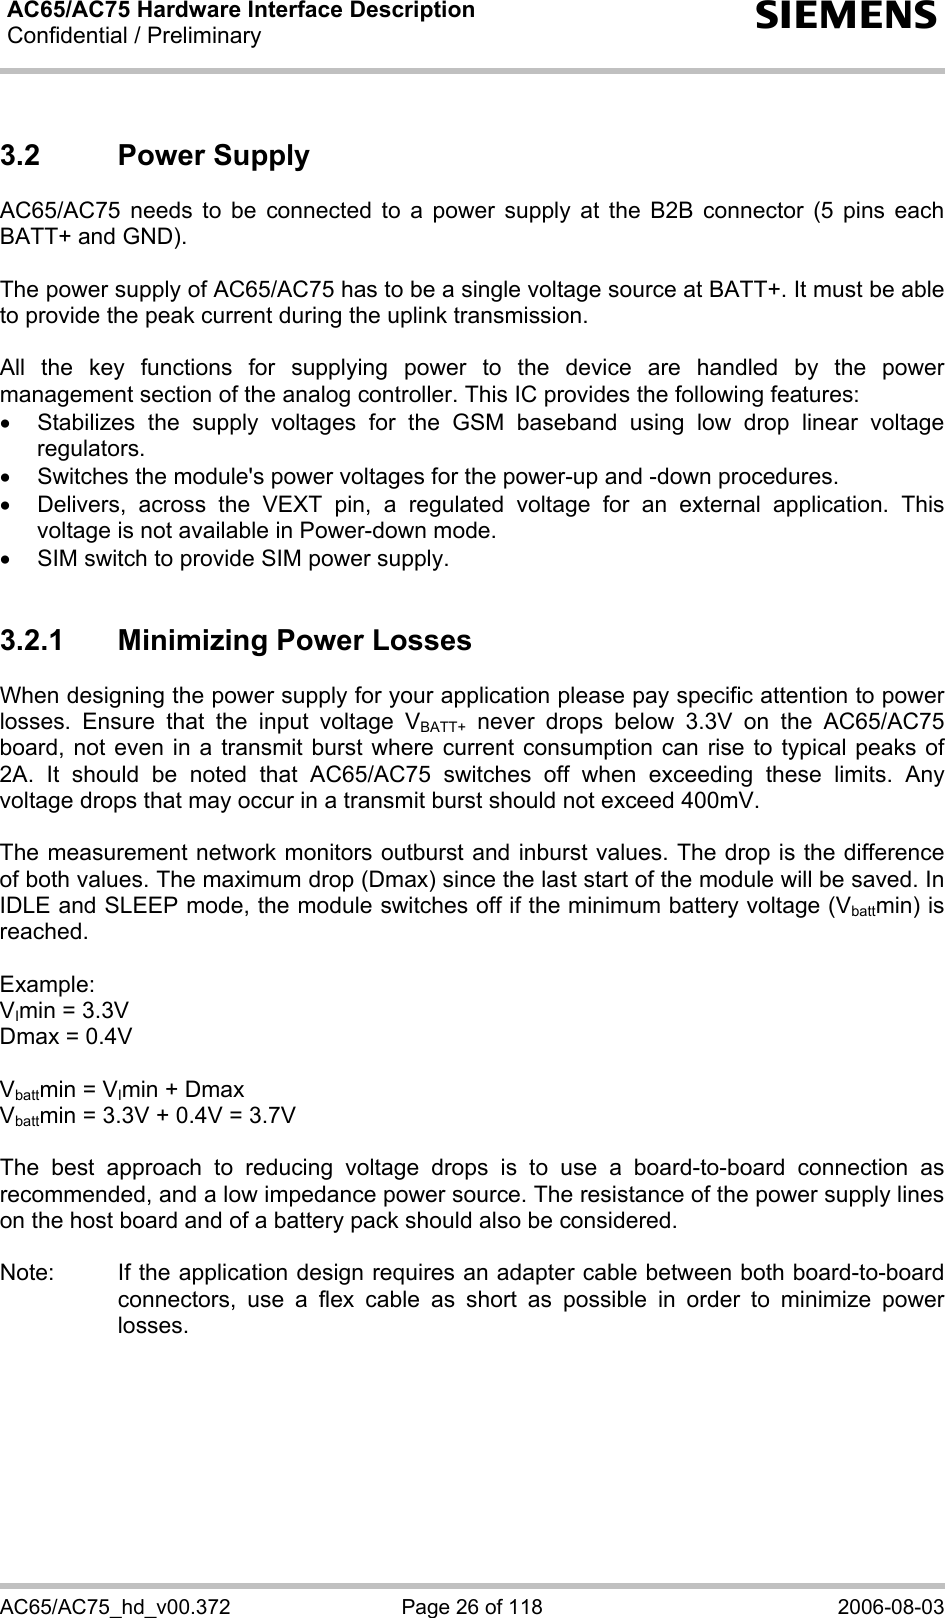 AC65/AC75 Hardware Interface Description Confidential / Preliminary  s AC65/AC75_hd_v00.372  Page 26 of 118  2006-08-03 3.2 Power Supply AC65/AC75 needs to be connected to a power supply at the B2B connector (5 pins each BATT+ and GND).   The power supply of AC65/AC75 has to be a single voltage source at BATT+. It must be able to provide the peak current during the uplink transmission.   All the key functions for supplying power to the device are handled by the power management section of the analog controller. This IC provides the following features: • Stabilizes the supply voltages for the GSM baseband using low drop linear voltage regulators. •  Switches the module&apos;s power voltages for the power-up and -down procedures. •  Delivers, across the VEXT pin, a regulated voltage for an external application. This voltage is not available in Power-down mode. •  SIM switch to provide SIM power supply.  3.2.1  Minimizing Power Losses When designing the power supply for your application please pay specific attention to power losses. Ensure that the input voltage VBATT+ never drops below 3.3V on the AC65/AC75 board, not even in a transmit burst where current consumption can rise to typical peaks of 2A. It should be noted that AC65/AC75 switches off when exceeding these limits. Any voltage drops that may occur in a transmit burst should not exceed 400mV.  The measurement network monitors outburst and inburst values. The drop is the difference of both values. The maximum drop (Dmax) since the last start of the module will be saved. In IDLE and SLEEP mode, the module switches off if the minimum battery voltage (Vbattmin) is reached.  Example:  VImin = 3.3V Dmax = 0.4V  Vbattmin = VImin + Dmax Vbattmin = 3.3V + 0.4V = 3.7V  The best approach to reducing voltage drops is to use a board-to-board connection as recommended, and a low impedance power source. The resistance of the power supply lines on the host board and of a battery pack should also be considered.  Note:  If the application design requires an adapter cable between both board-to-board connectors, use a flex cable as short as possible in order to minimize power losses.   